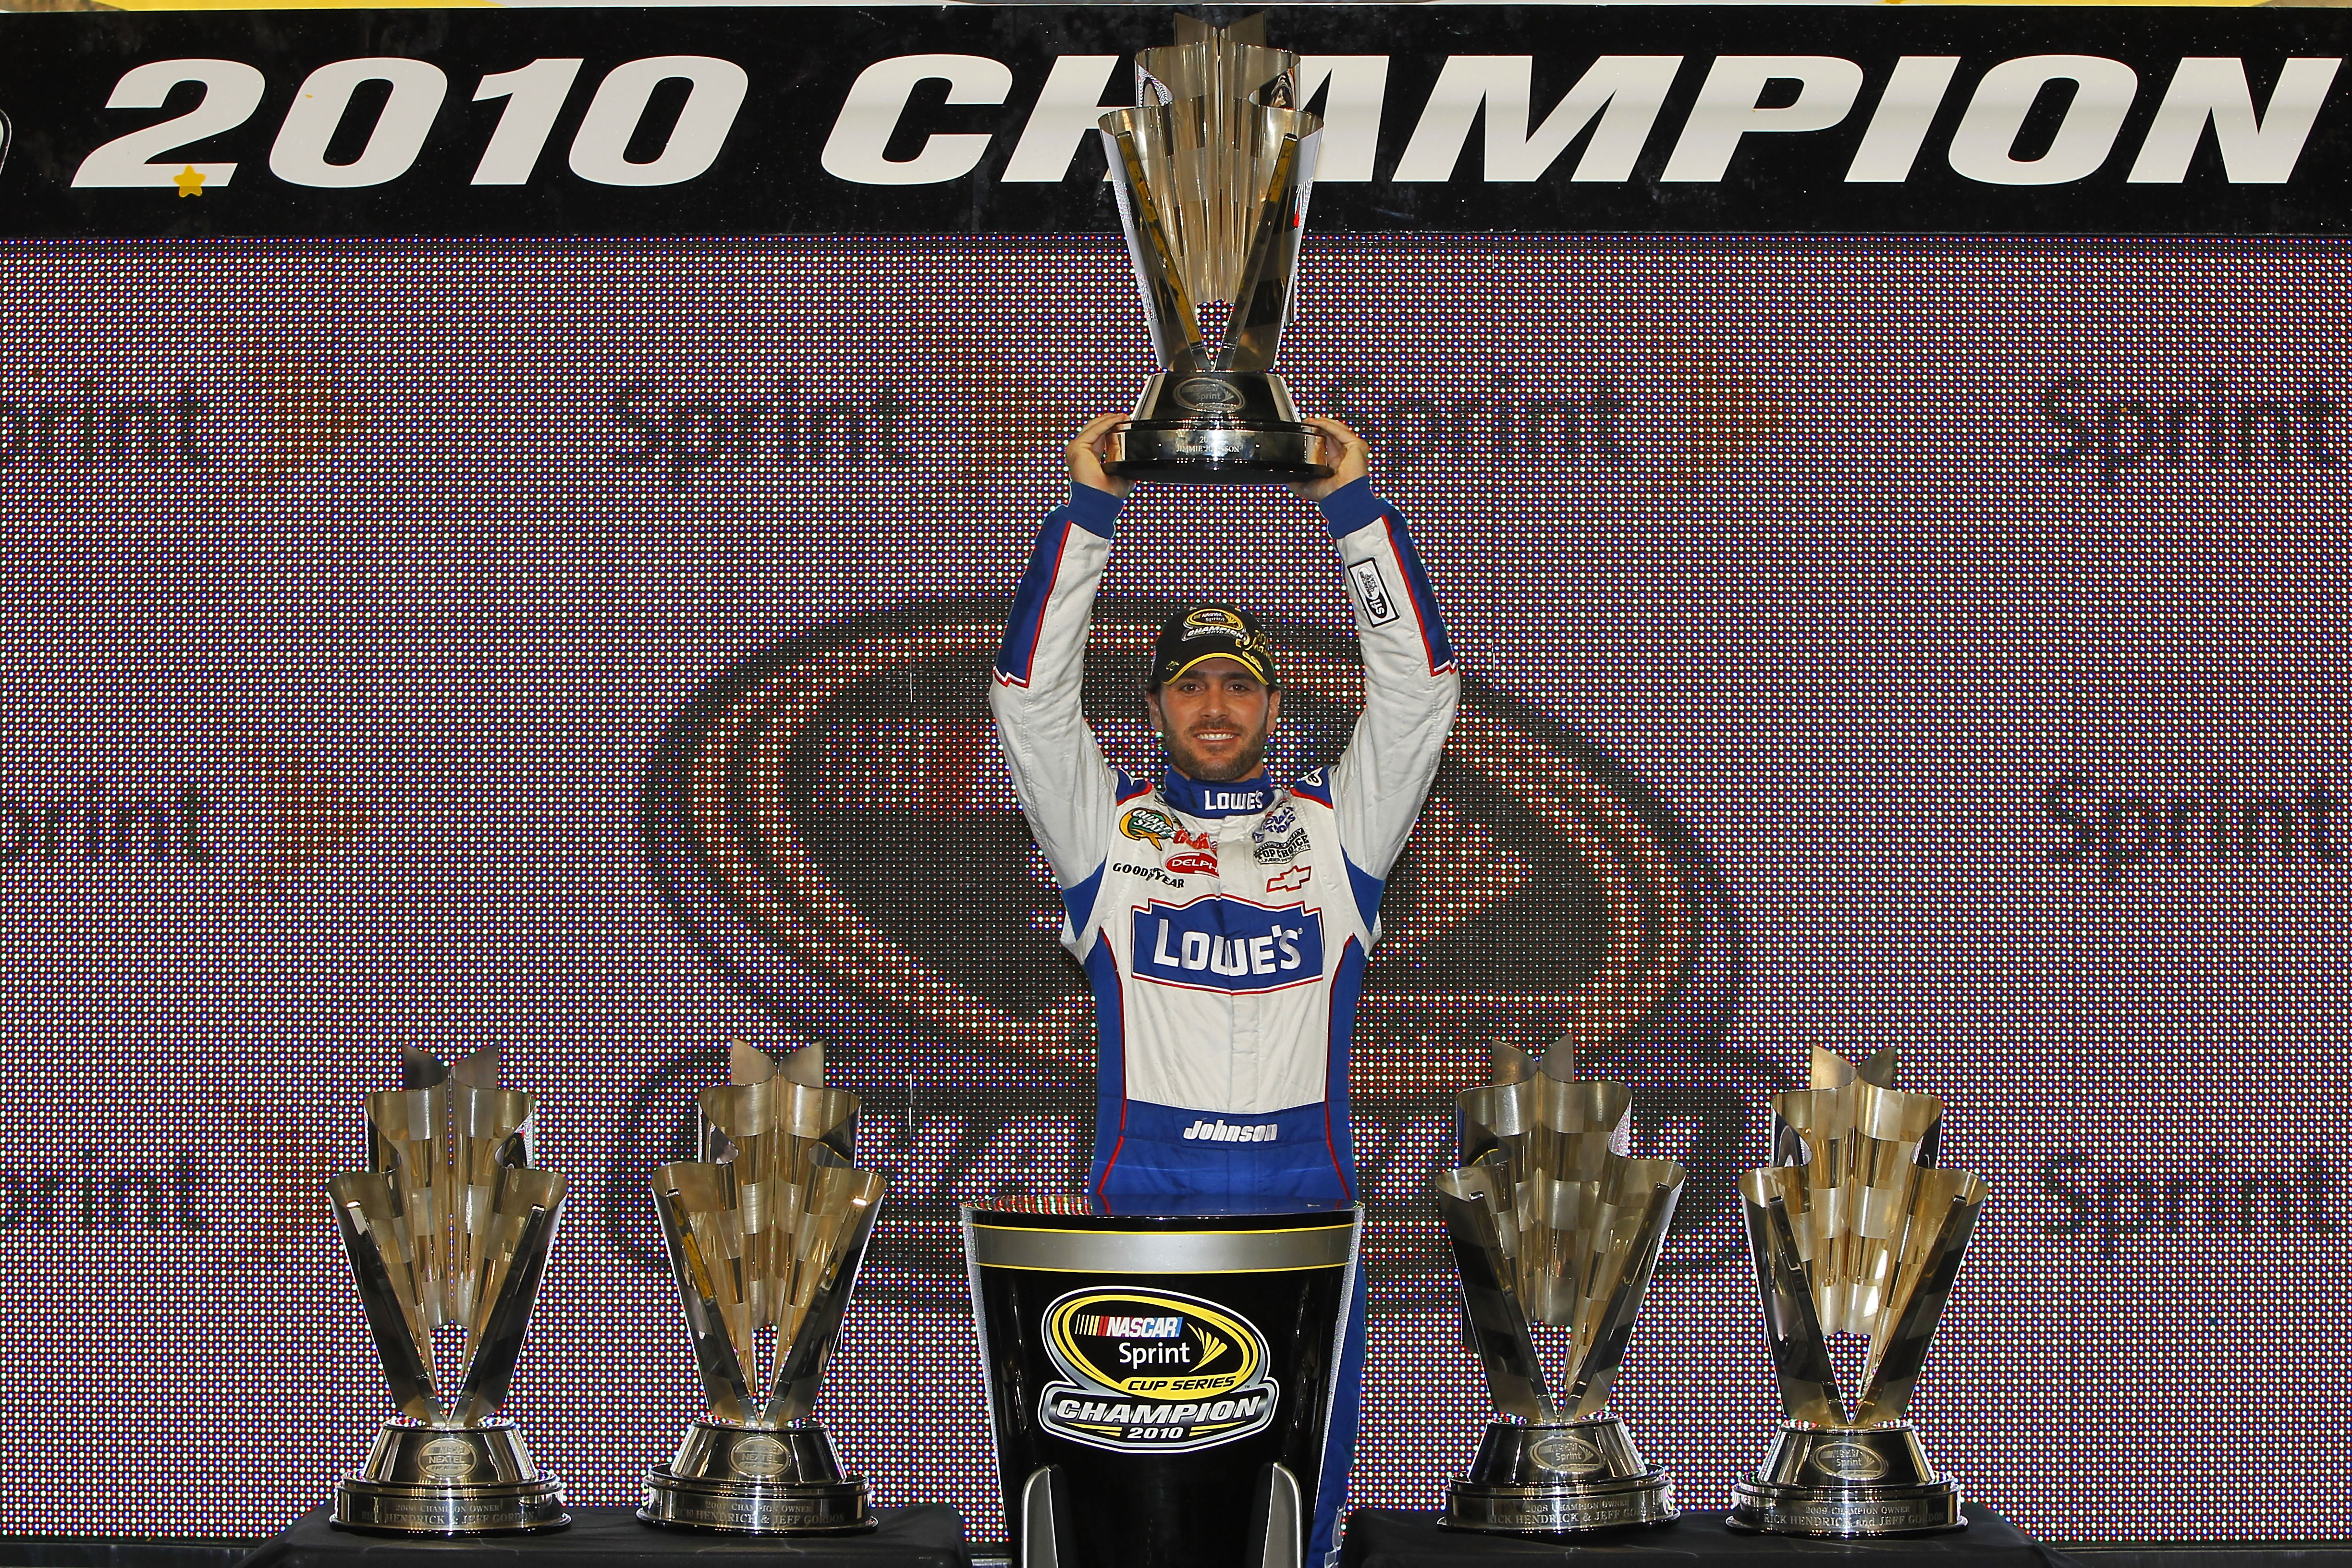 HOMESTEAD, FL - NOVEMBER 21:  Jimmie Johnson, driver of the #48 Lowe's Chevrolet, celebrates after finishing in second place in the Ford 400 to clinch his fifth consecutive NASCAR Sprint Cup championship at Homestead-Miami Speedway on November 21, 2010 in